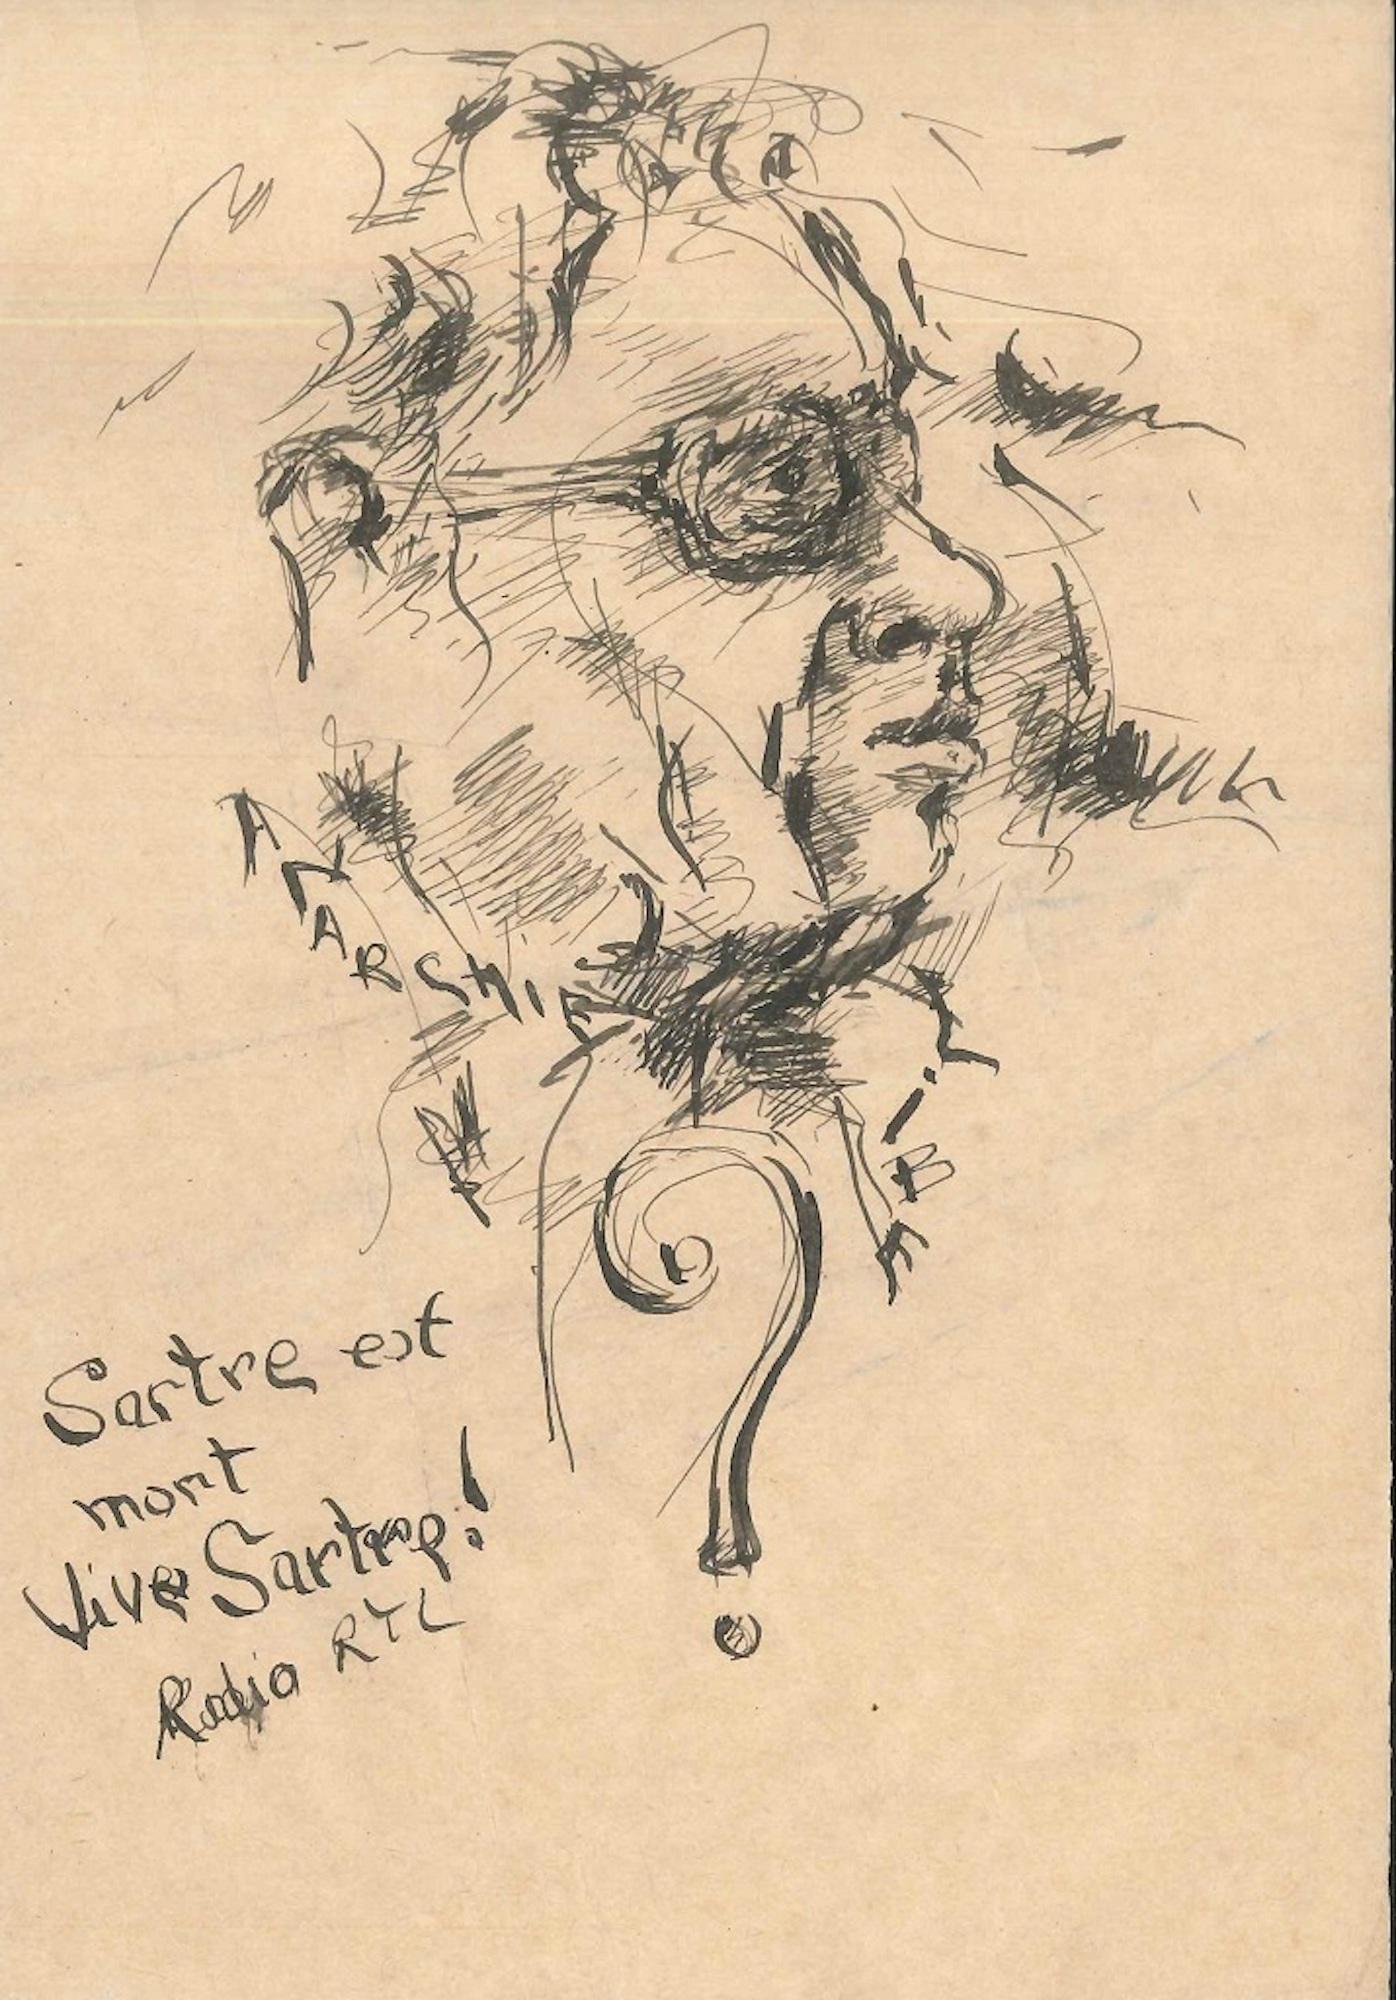 Unknown Portrait - Sartre est mort - Original Ink Drawing by Anonymous French Artist 2nd half 1900